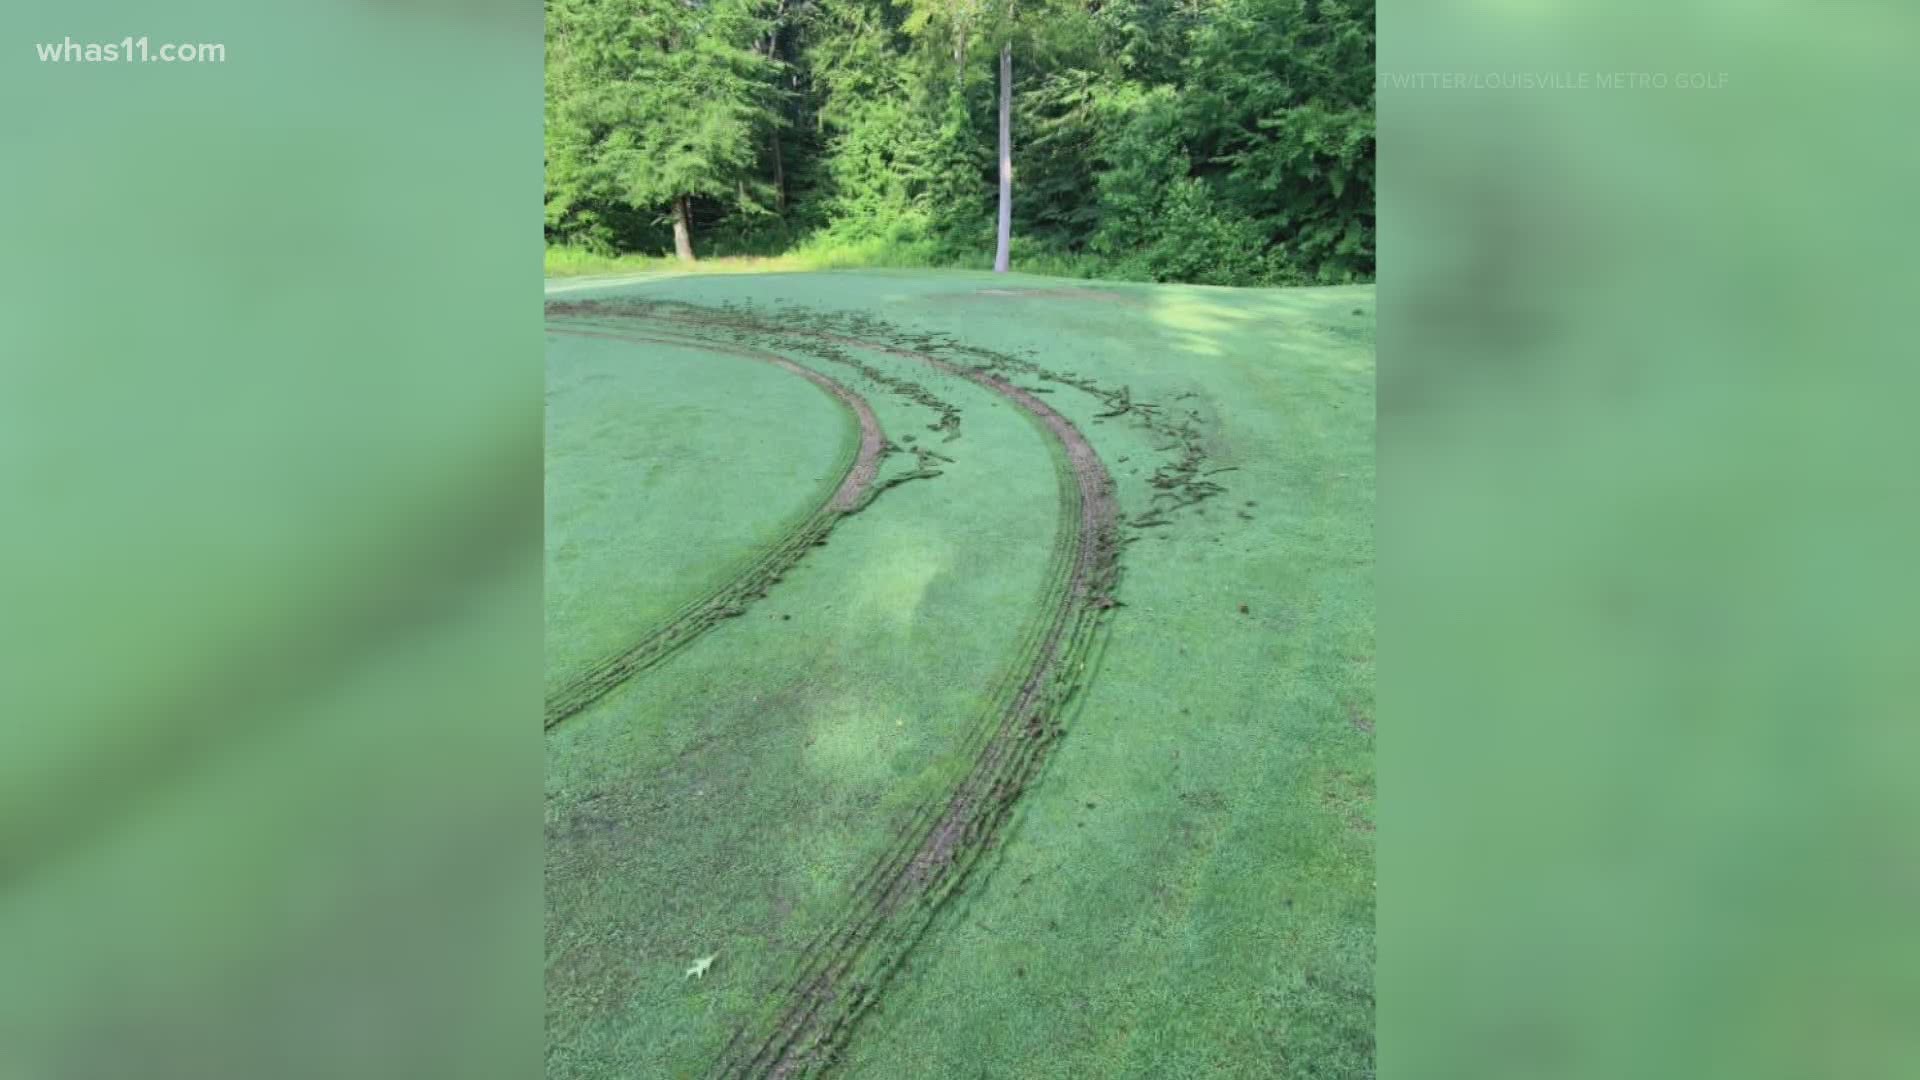 A reward is being offered for information after Sun Valley Golf Course was vandalized.